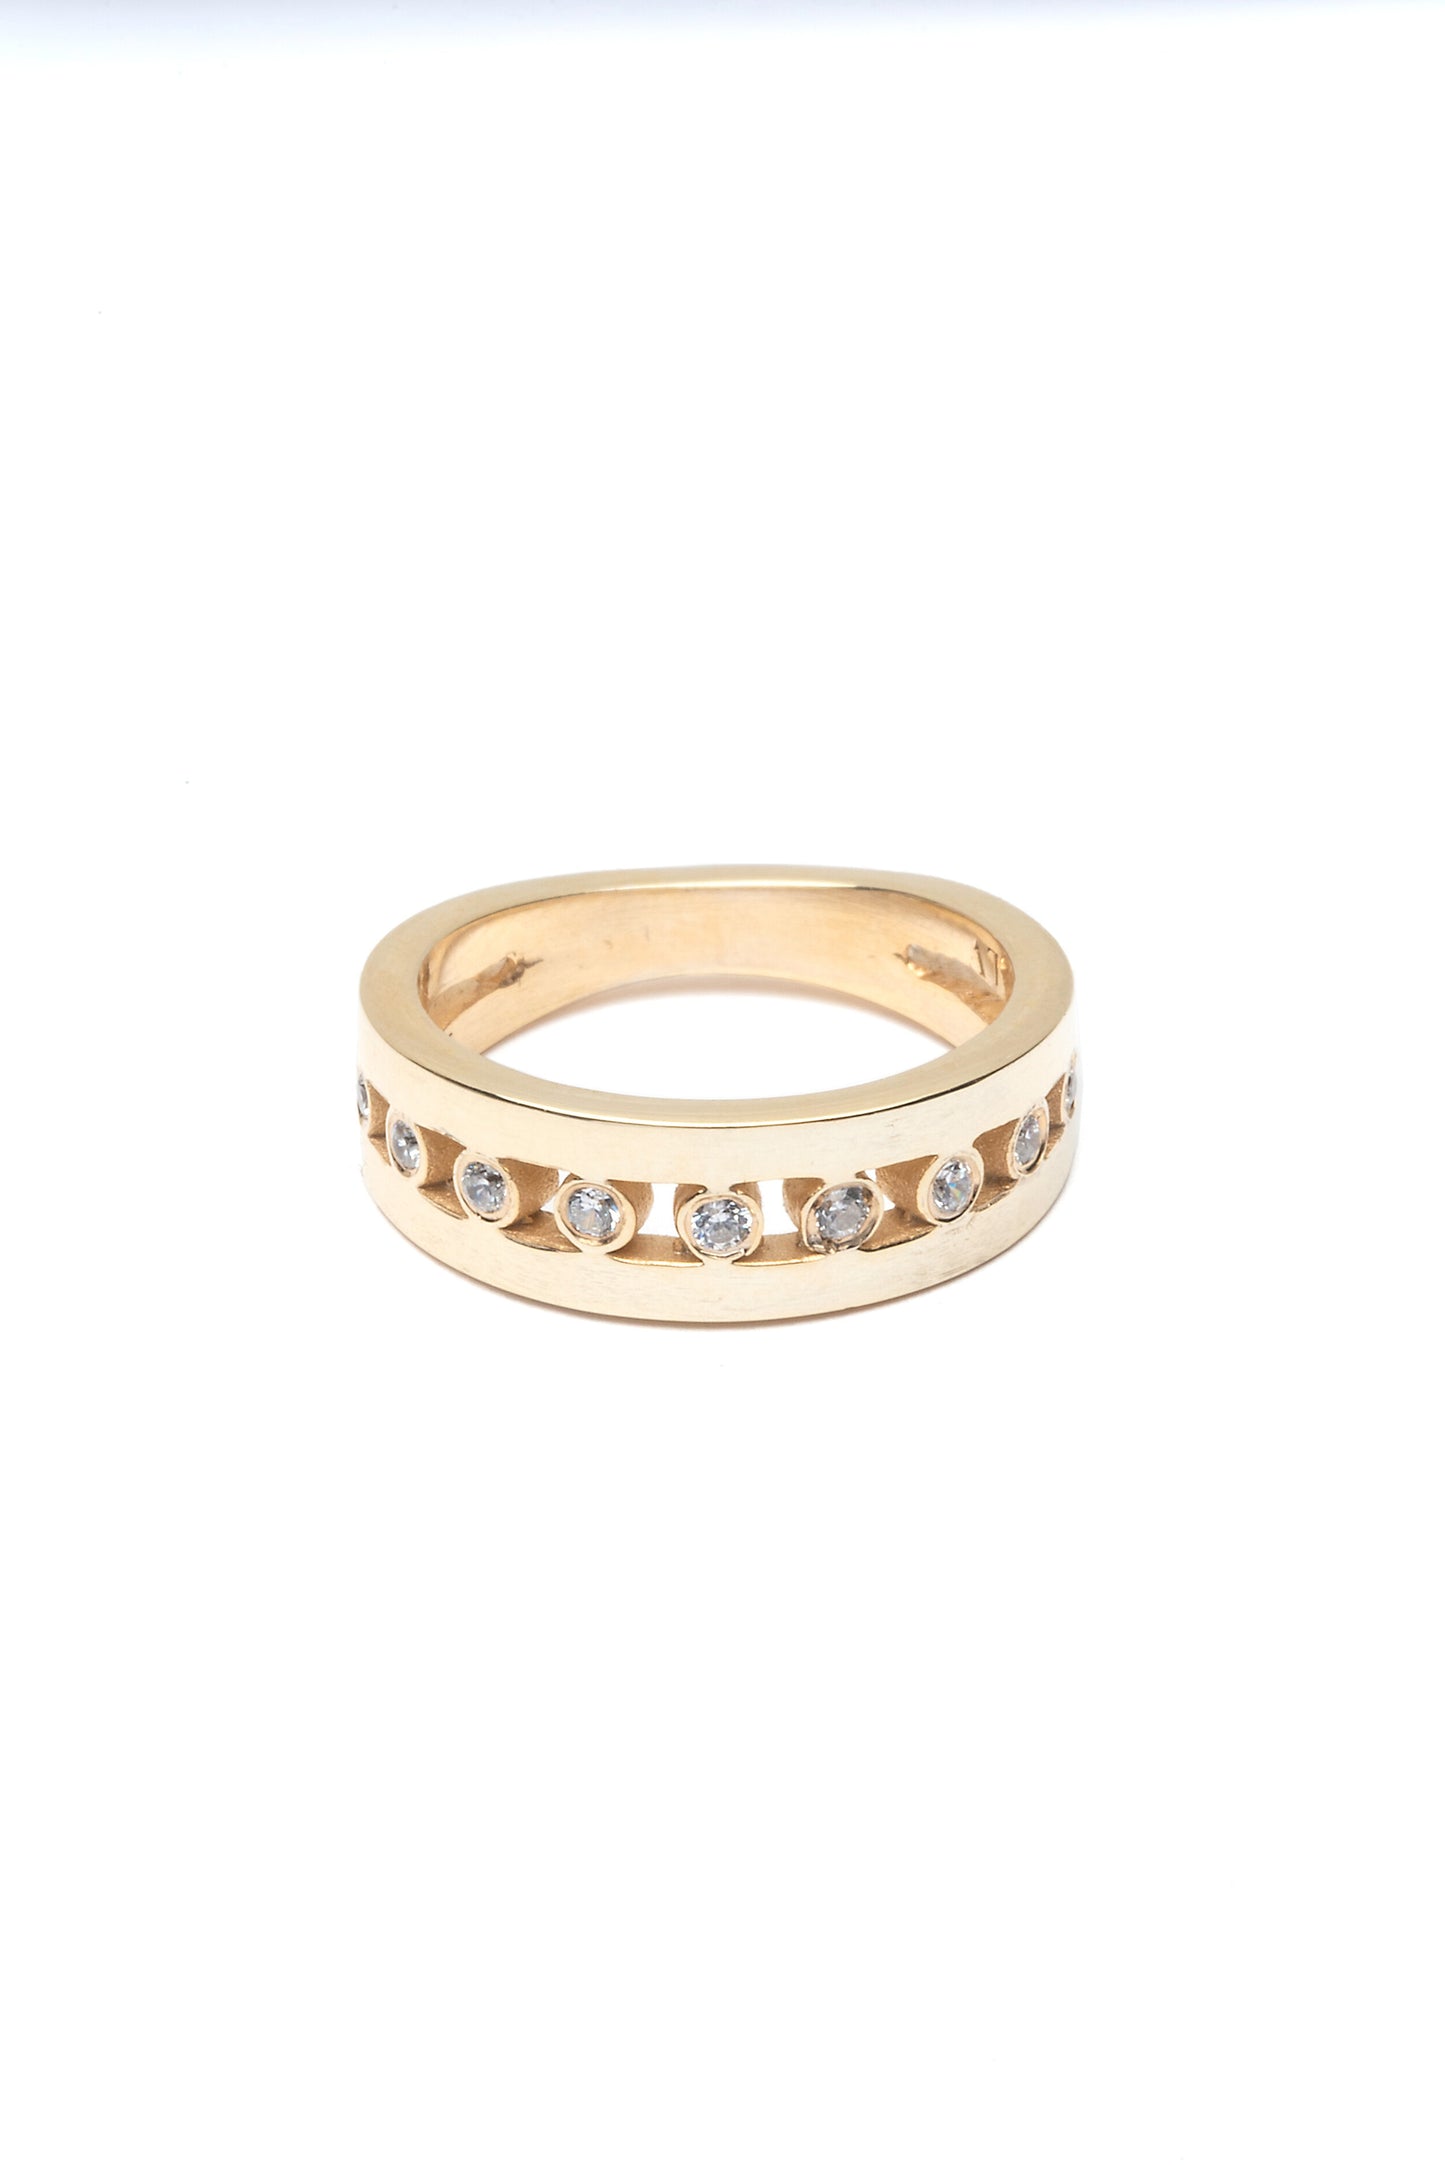 White Gold and Cute Ring - Gold Plated